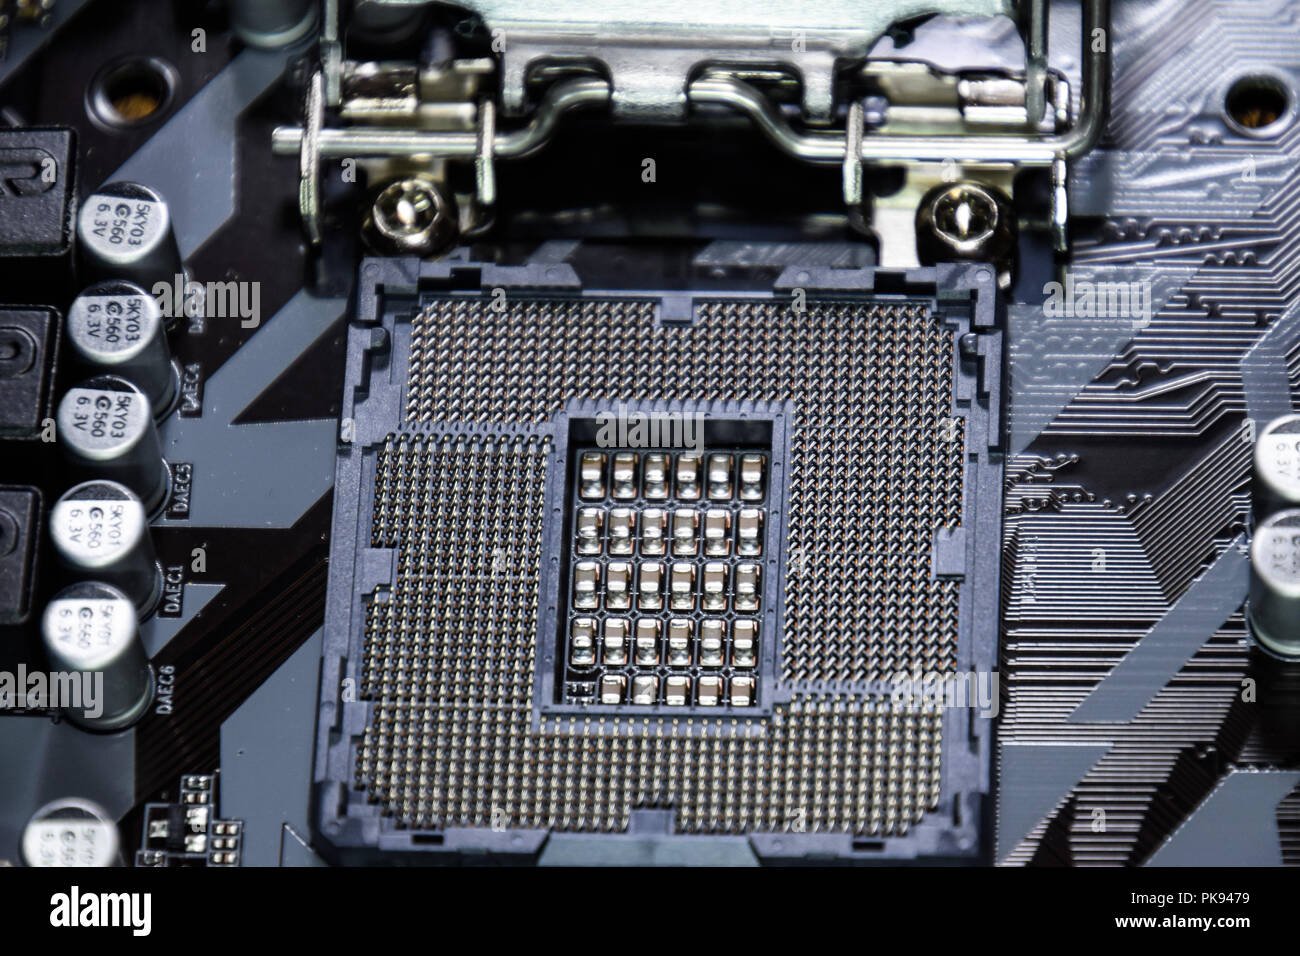 A nest for the Intel processor in the motherboard. Stock Photo